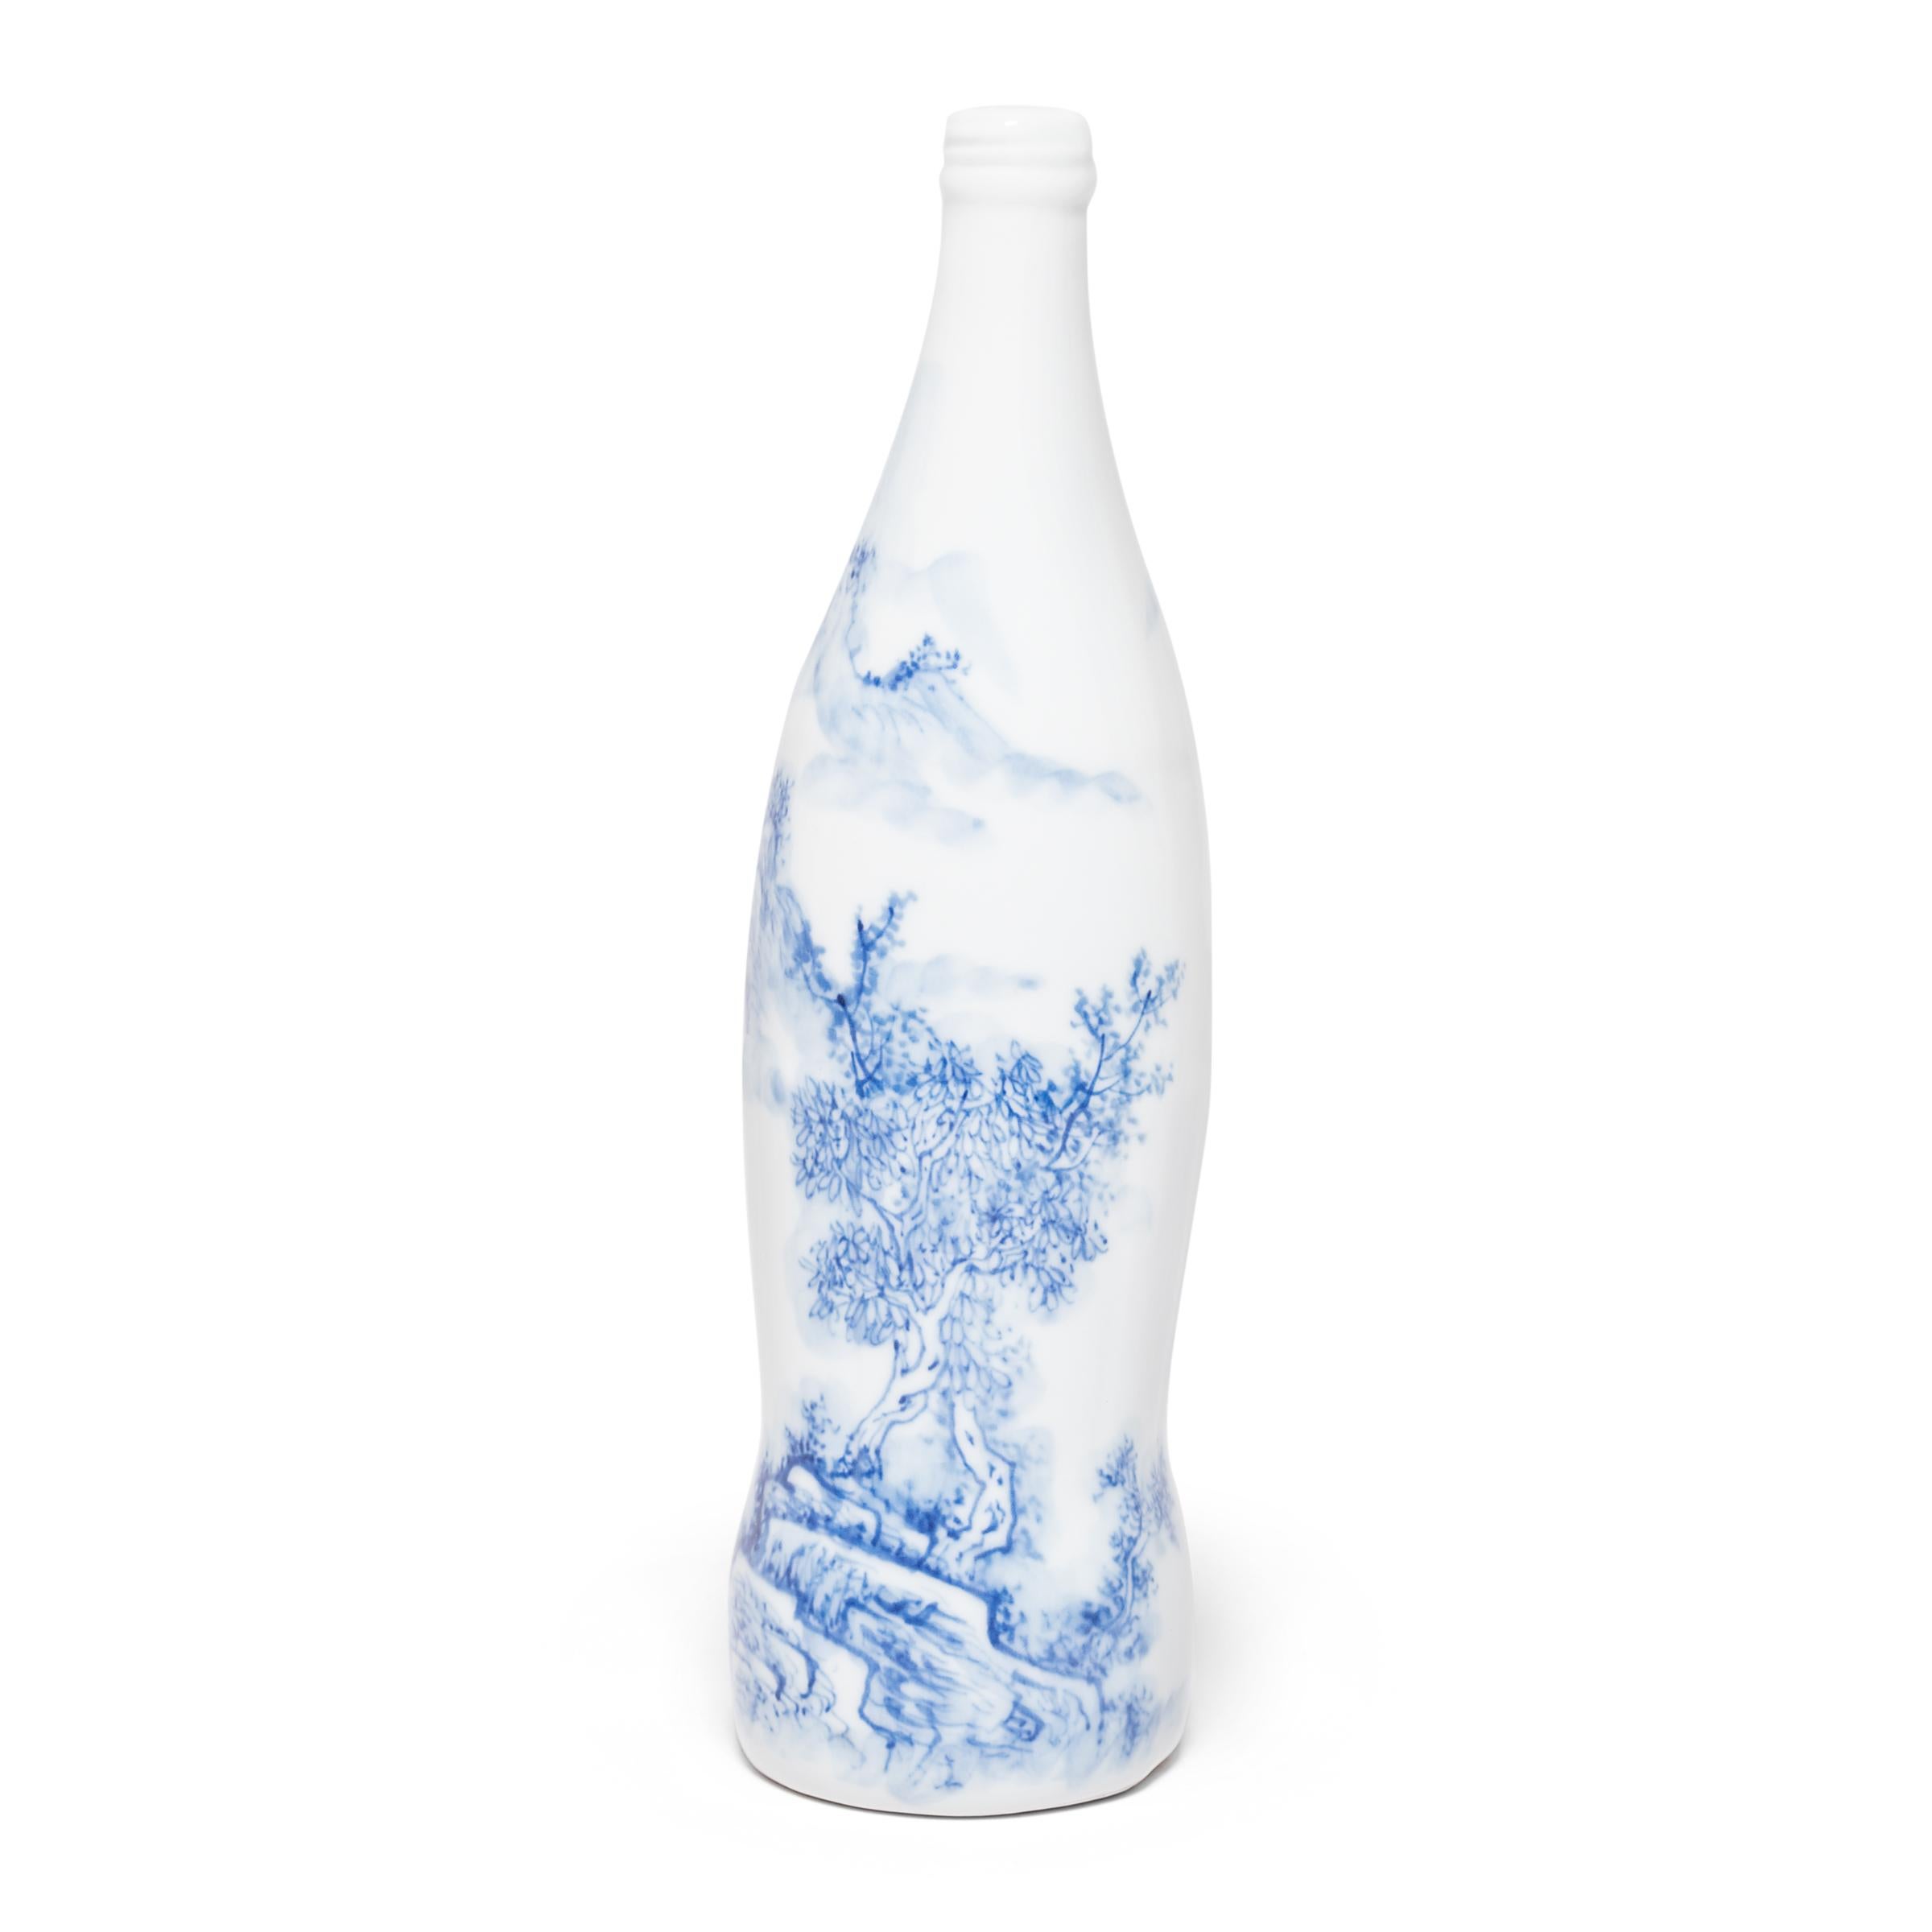 Created by artist Taikkun Li, this limited edition hand-painted cola bottle is one of a series drawing on the rich tradition of Chinese blue-and-white ceramics. Fired at the historic Chinese imperial kilns of Jingdezhen, this cola bottle is